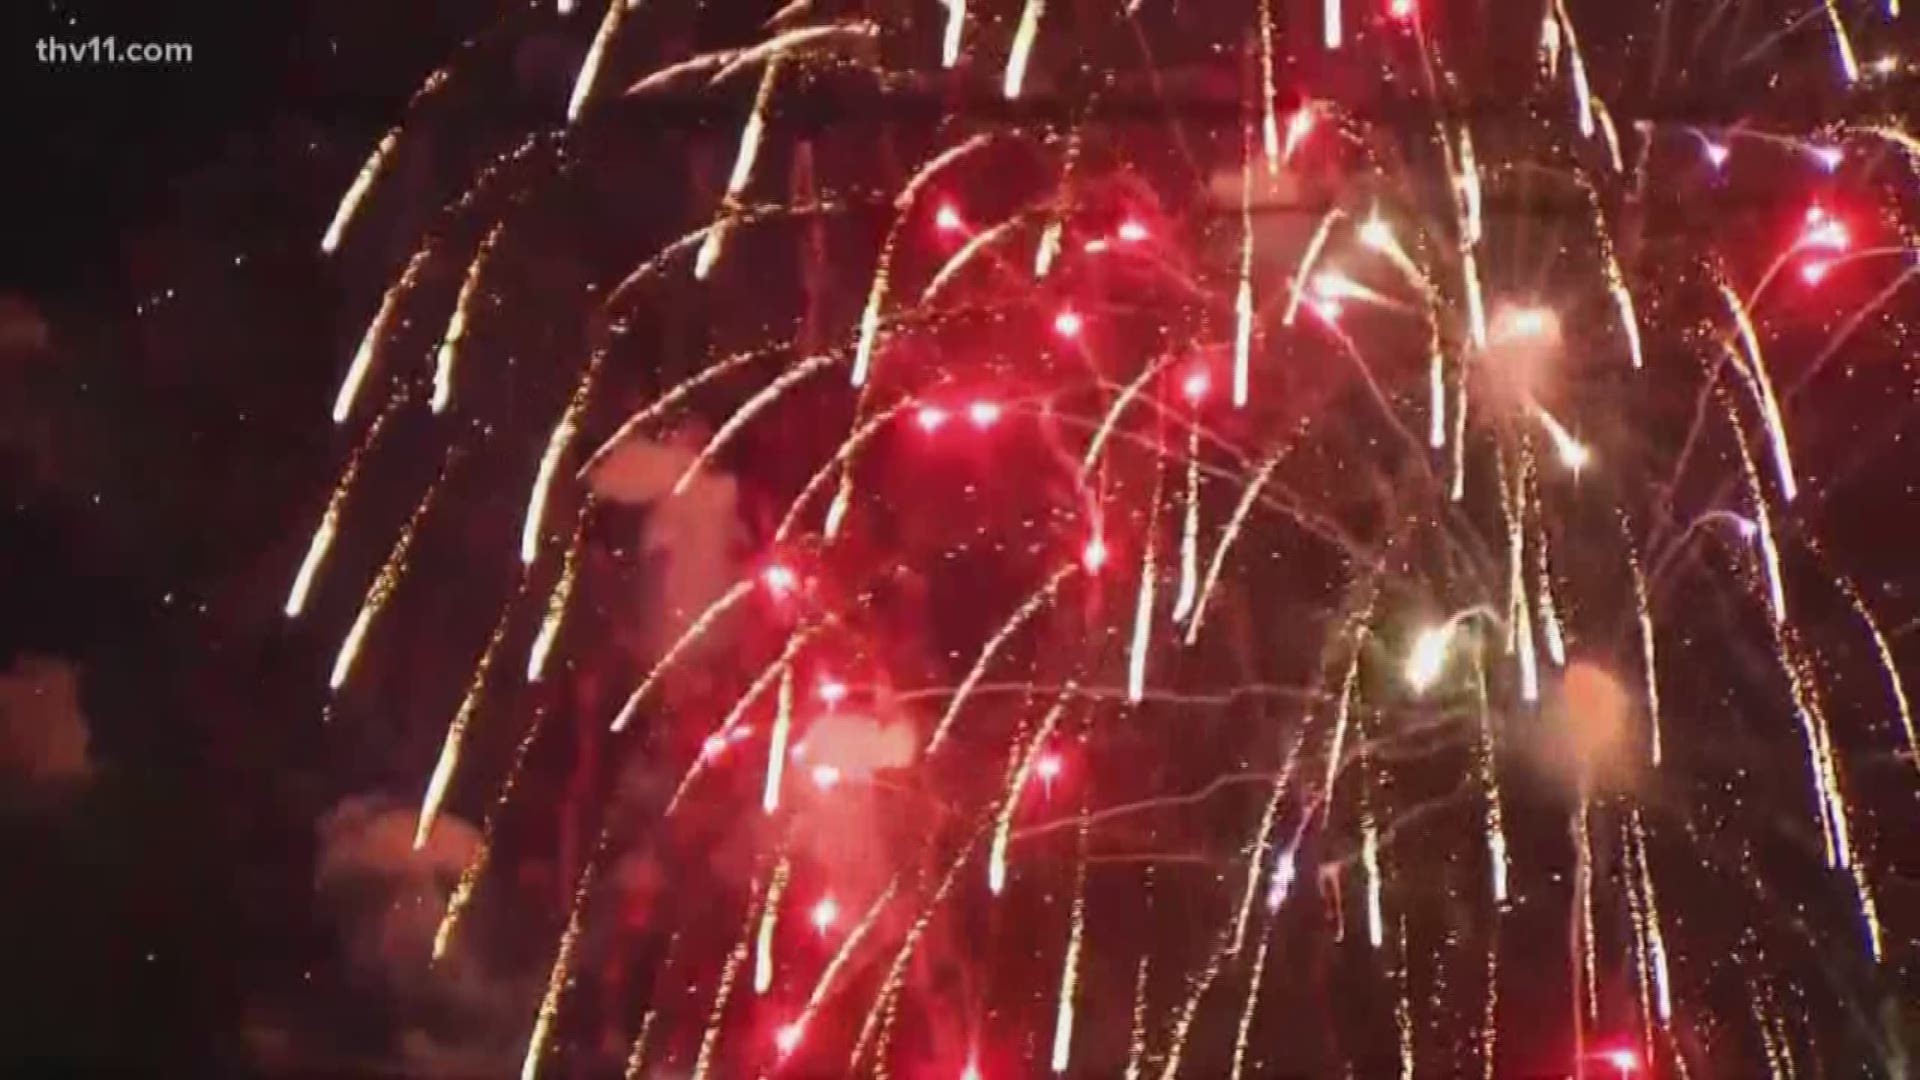 How do fireworks make all those lights? THV11's Nathan Scott gives us a tour of the science of fireworks.